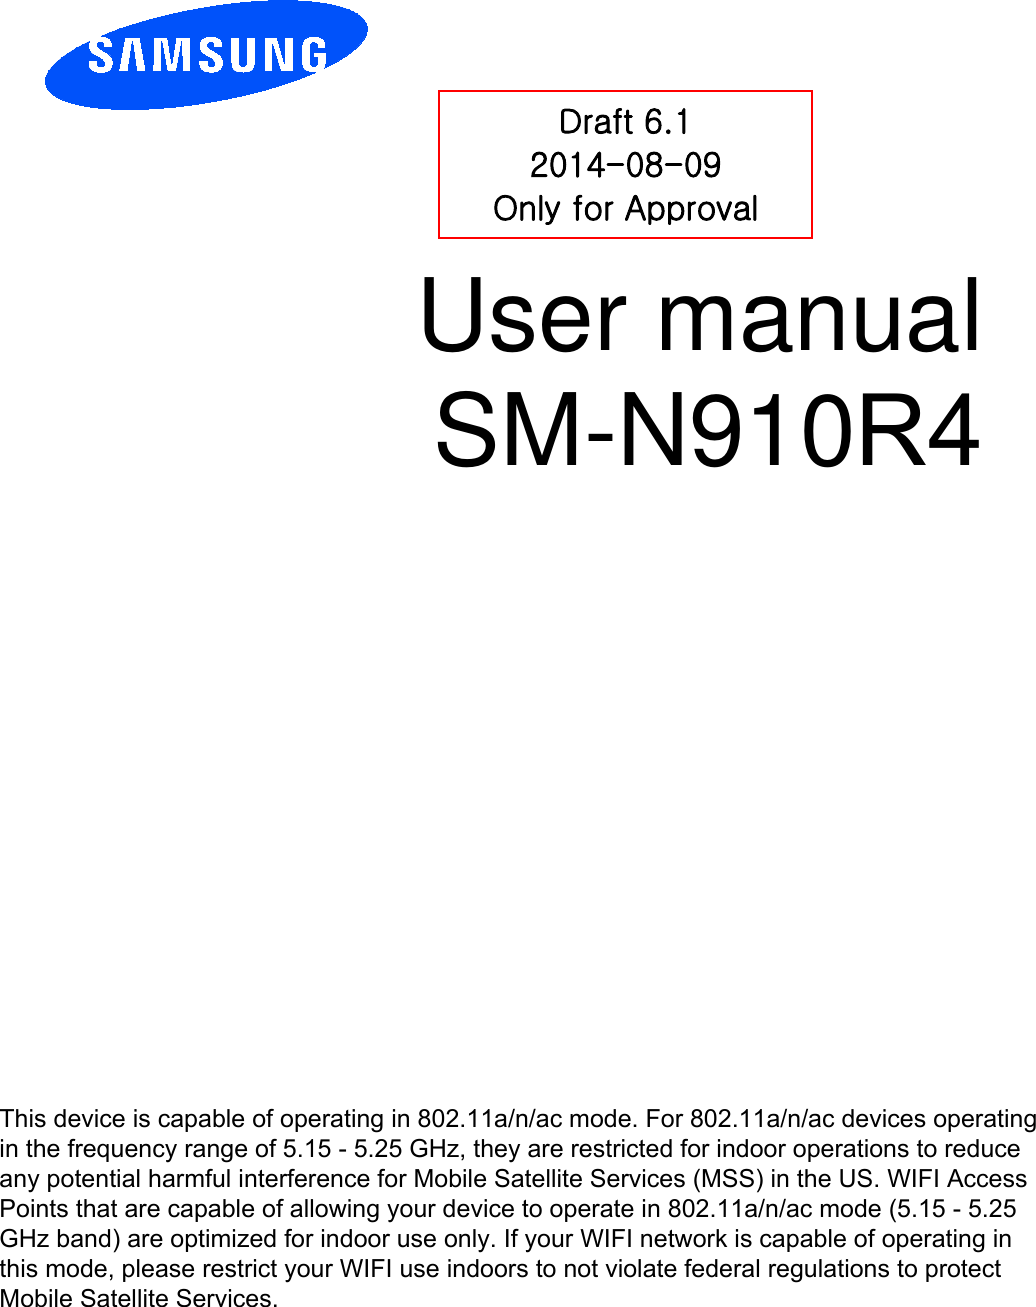 User manual SM-N910R4 Draft 6.1 2014-08-09 Only for Approval This device is capable of operating in 802.11a/n/ac mode. For 802.11a/n/ac devices operating in the frequency range of 5.15 - 5.25 GHz, they are restricted for indoor operations to reduce any potential harmful interference for Mobile Satellite Services (MSS) in the US. WIFI Access Points that are capable of allowing your device to operate in 802.11a/n/ac mode (5.15 - 5.25 GHz band) are optimized for indoor use only. If your WIFI network is capable of operating in this mode, please restrict your WIFI use indoors to not violate federal regulations to protect Mobile Satellite Services. 